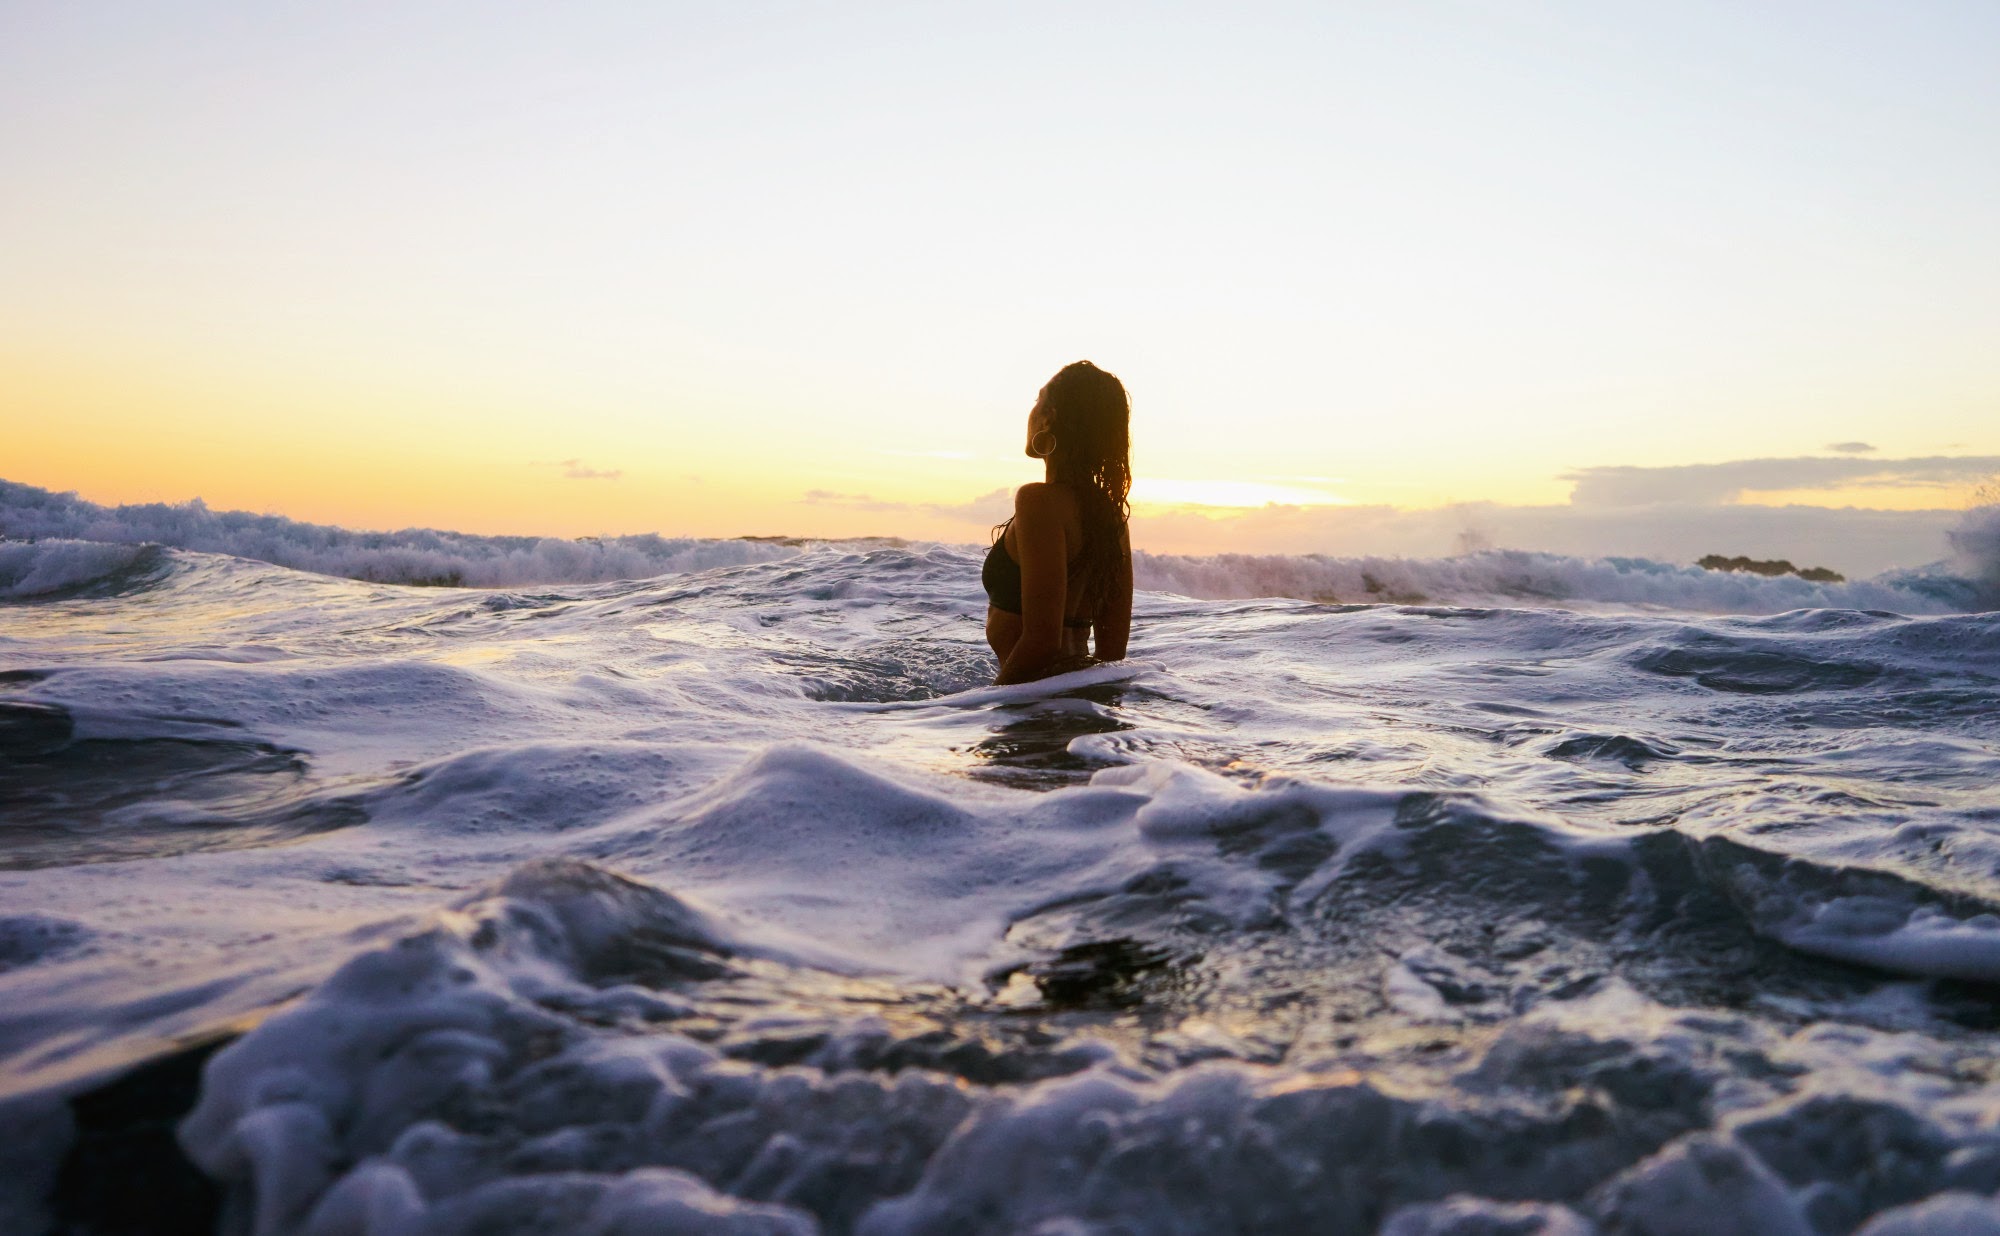 A person in the ocean at sunset.